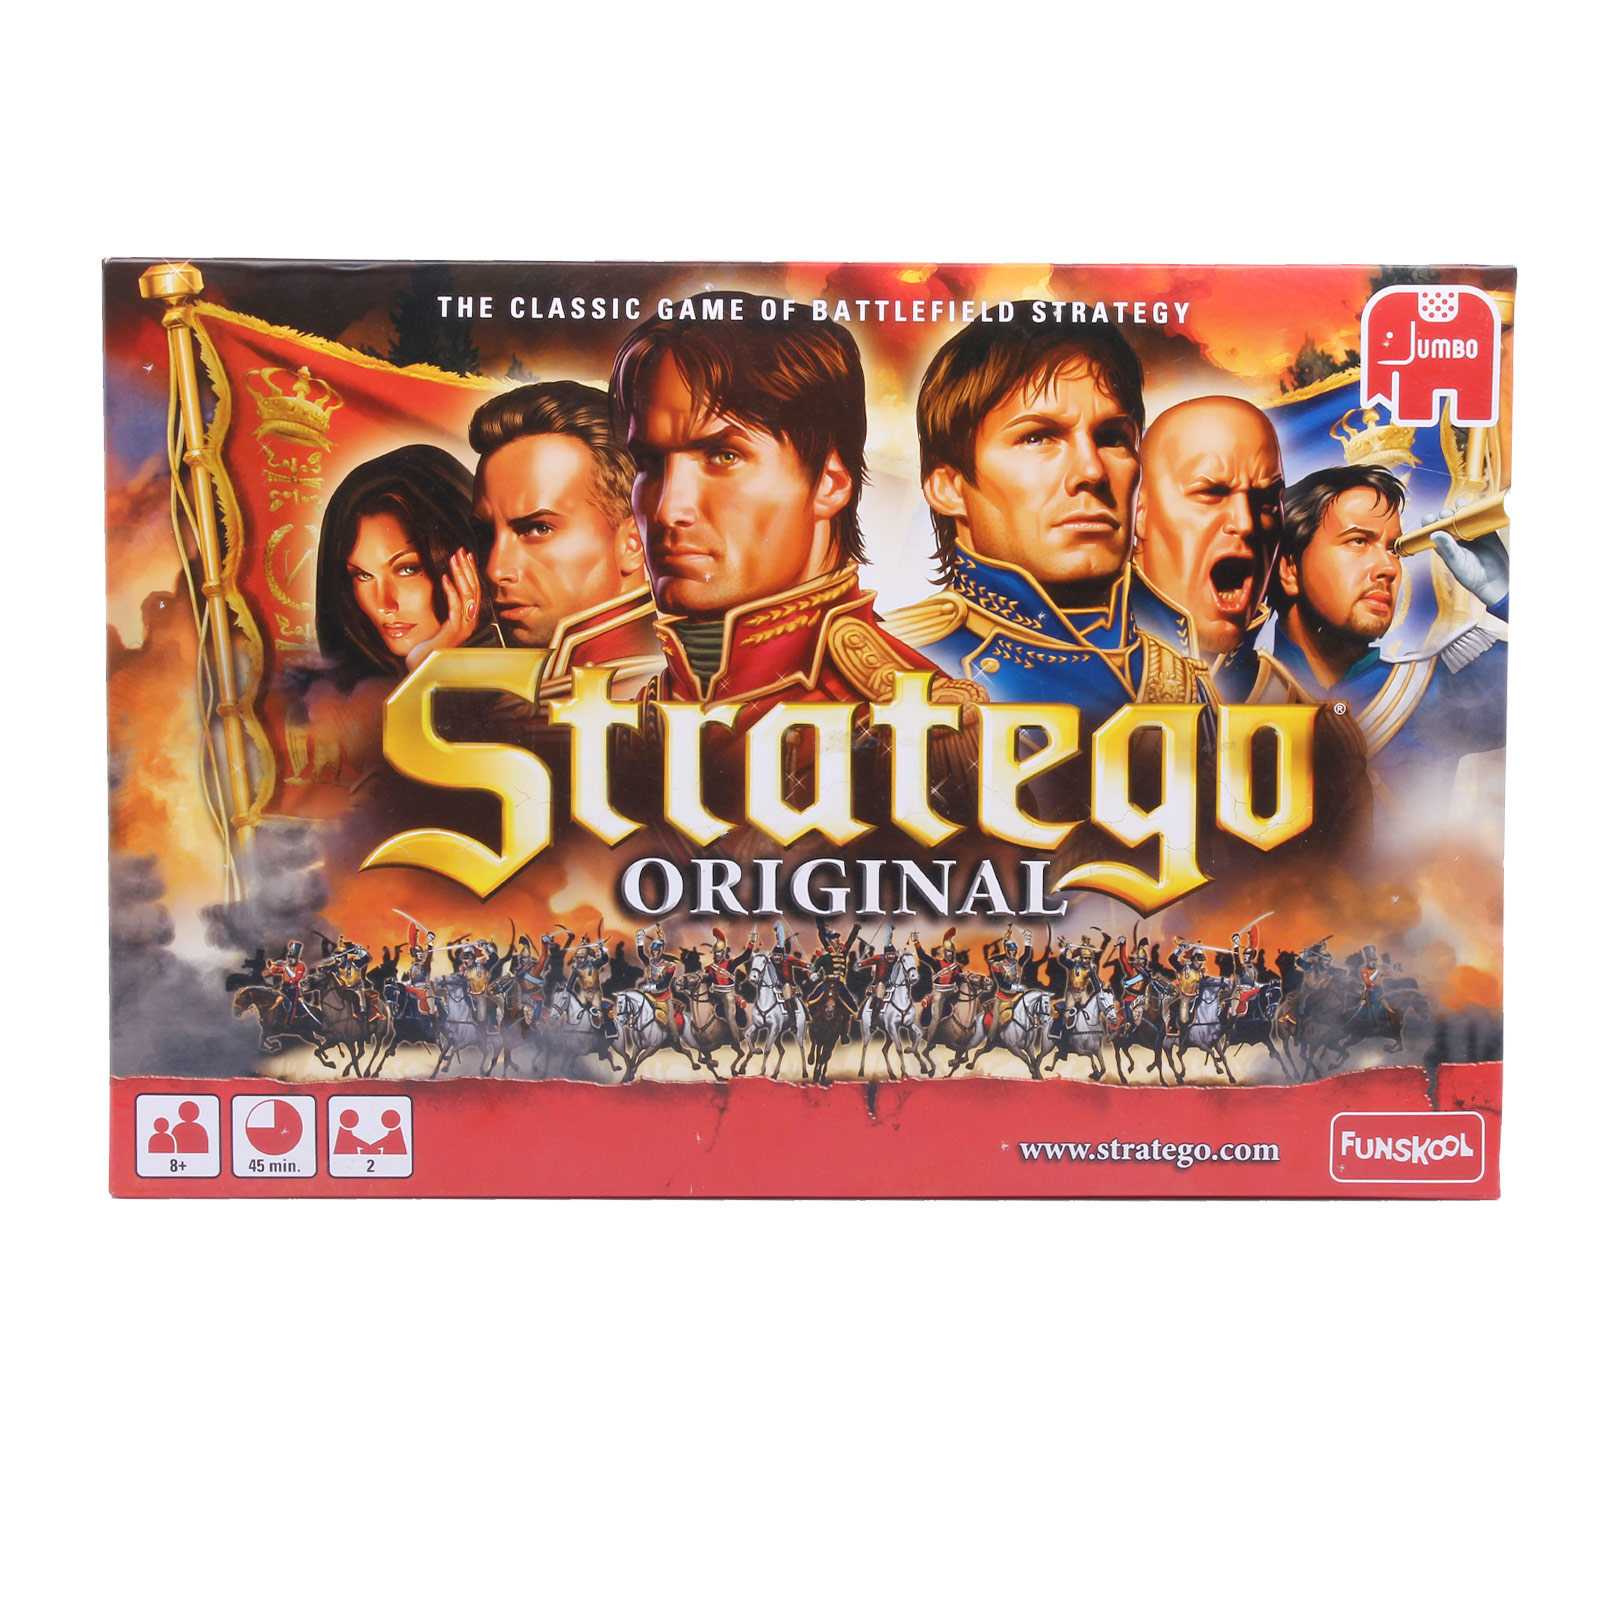 How Stratego Works